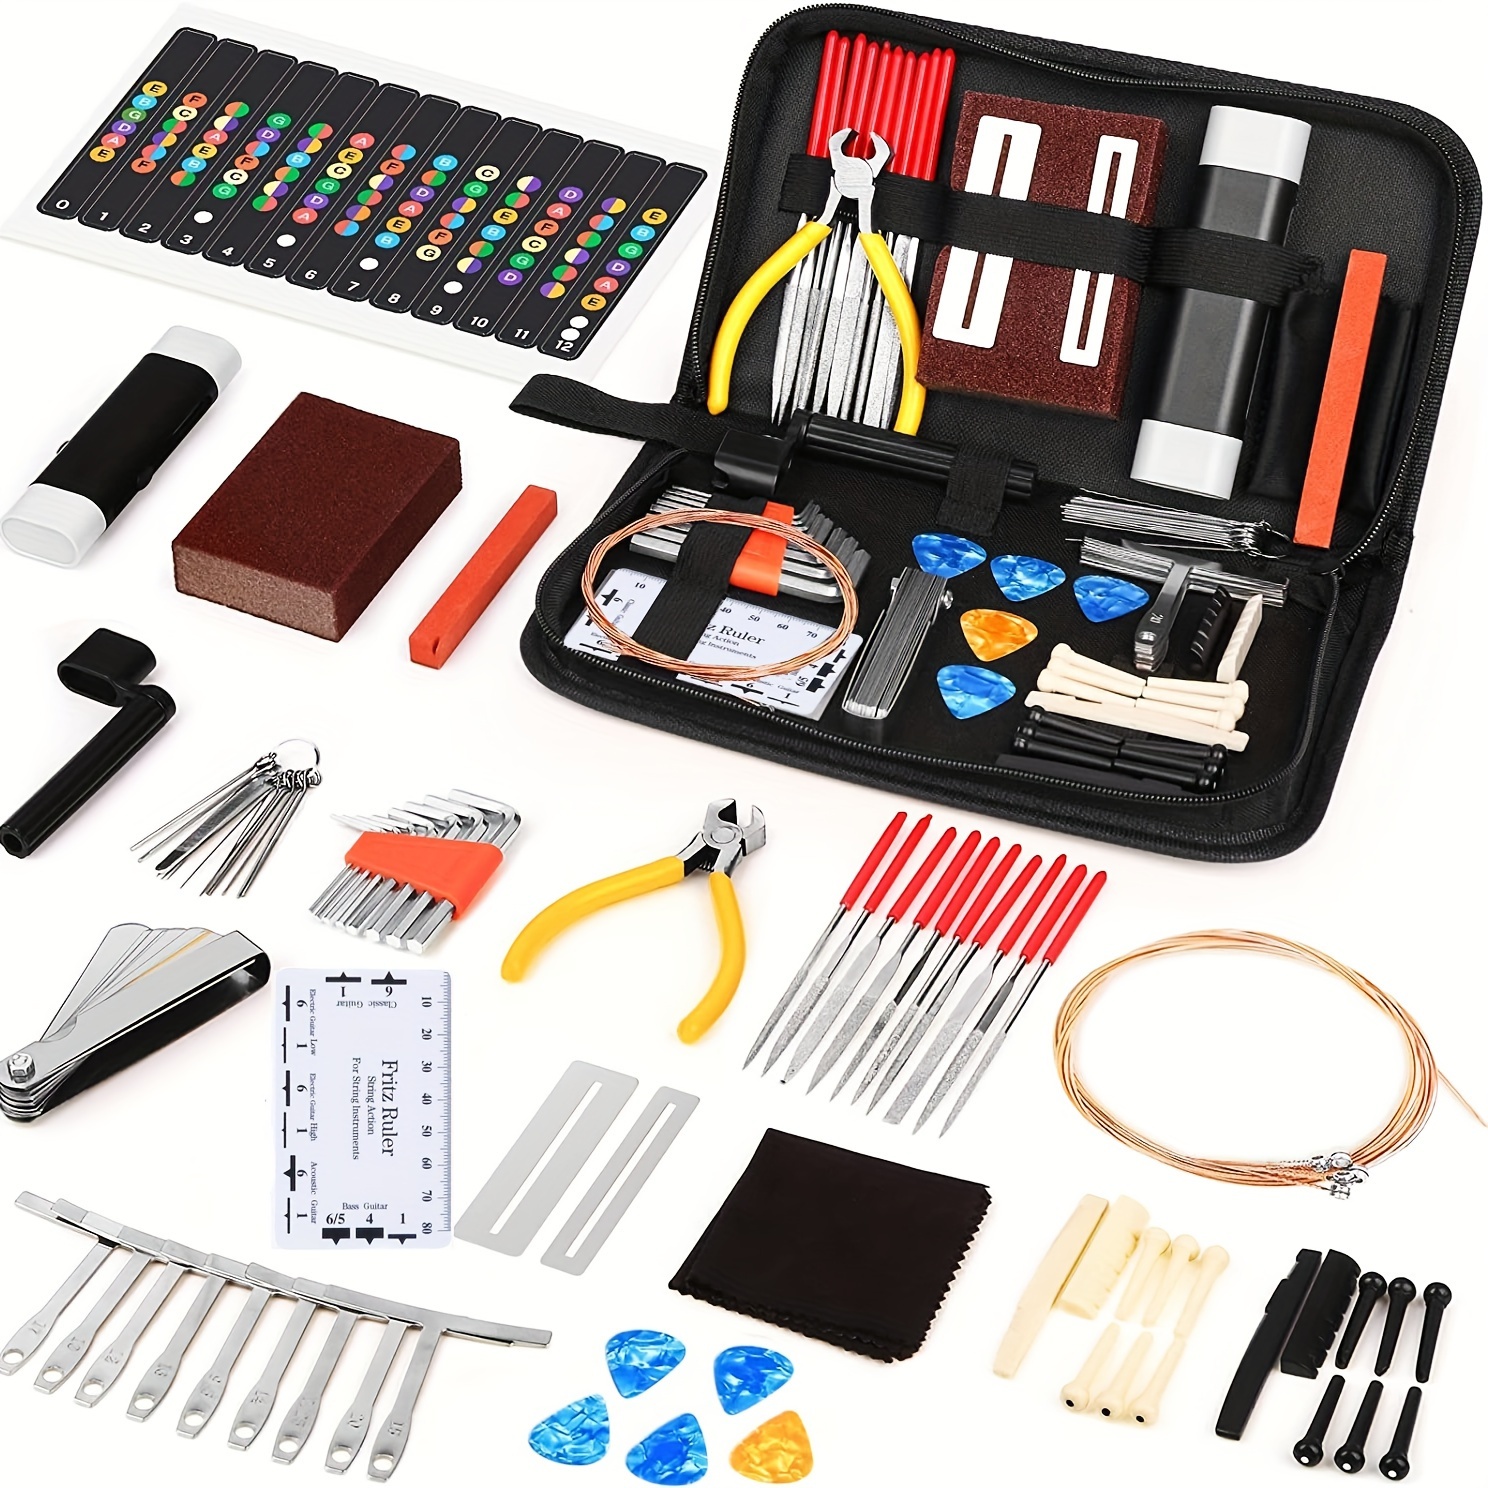 

Complete Guitar Repair And Maintenance Tool Kit With Strings, Picks, Bridge Pins, And Gauge - Perfect Gift For Musicians And Guitar Enthusiasts